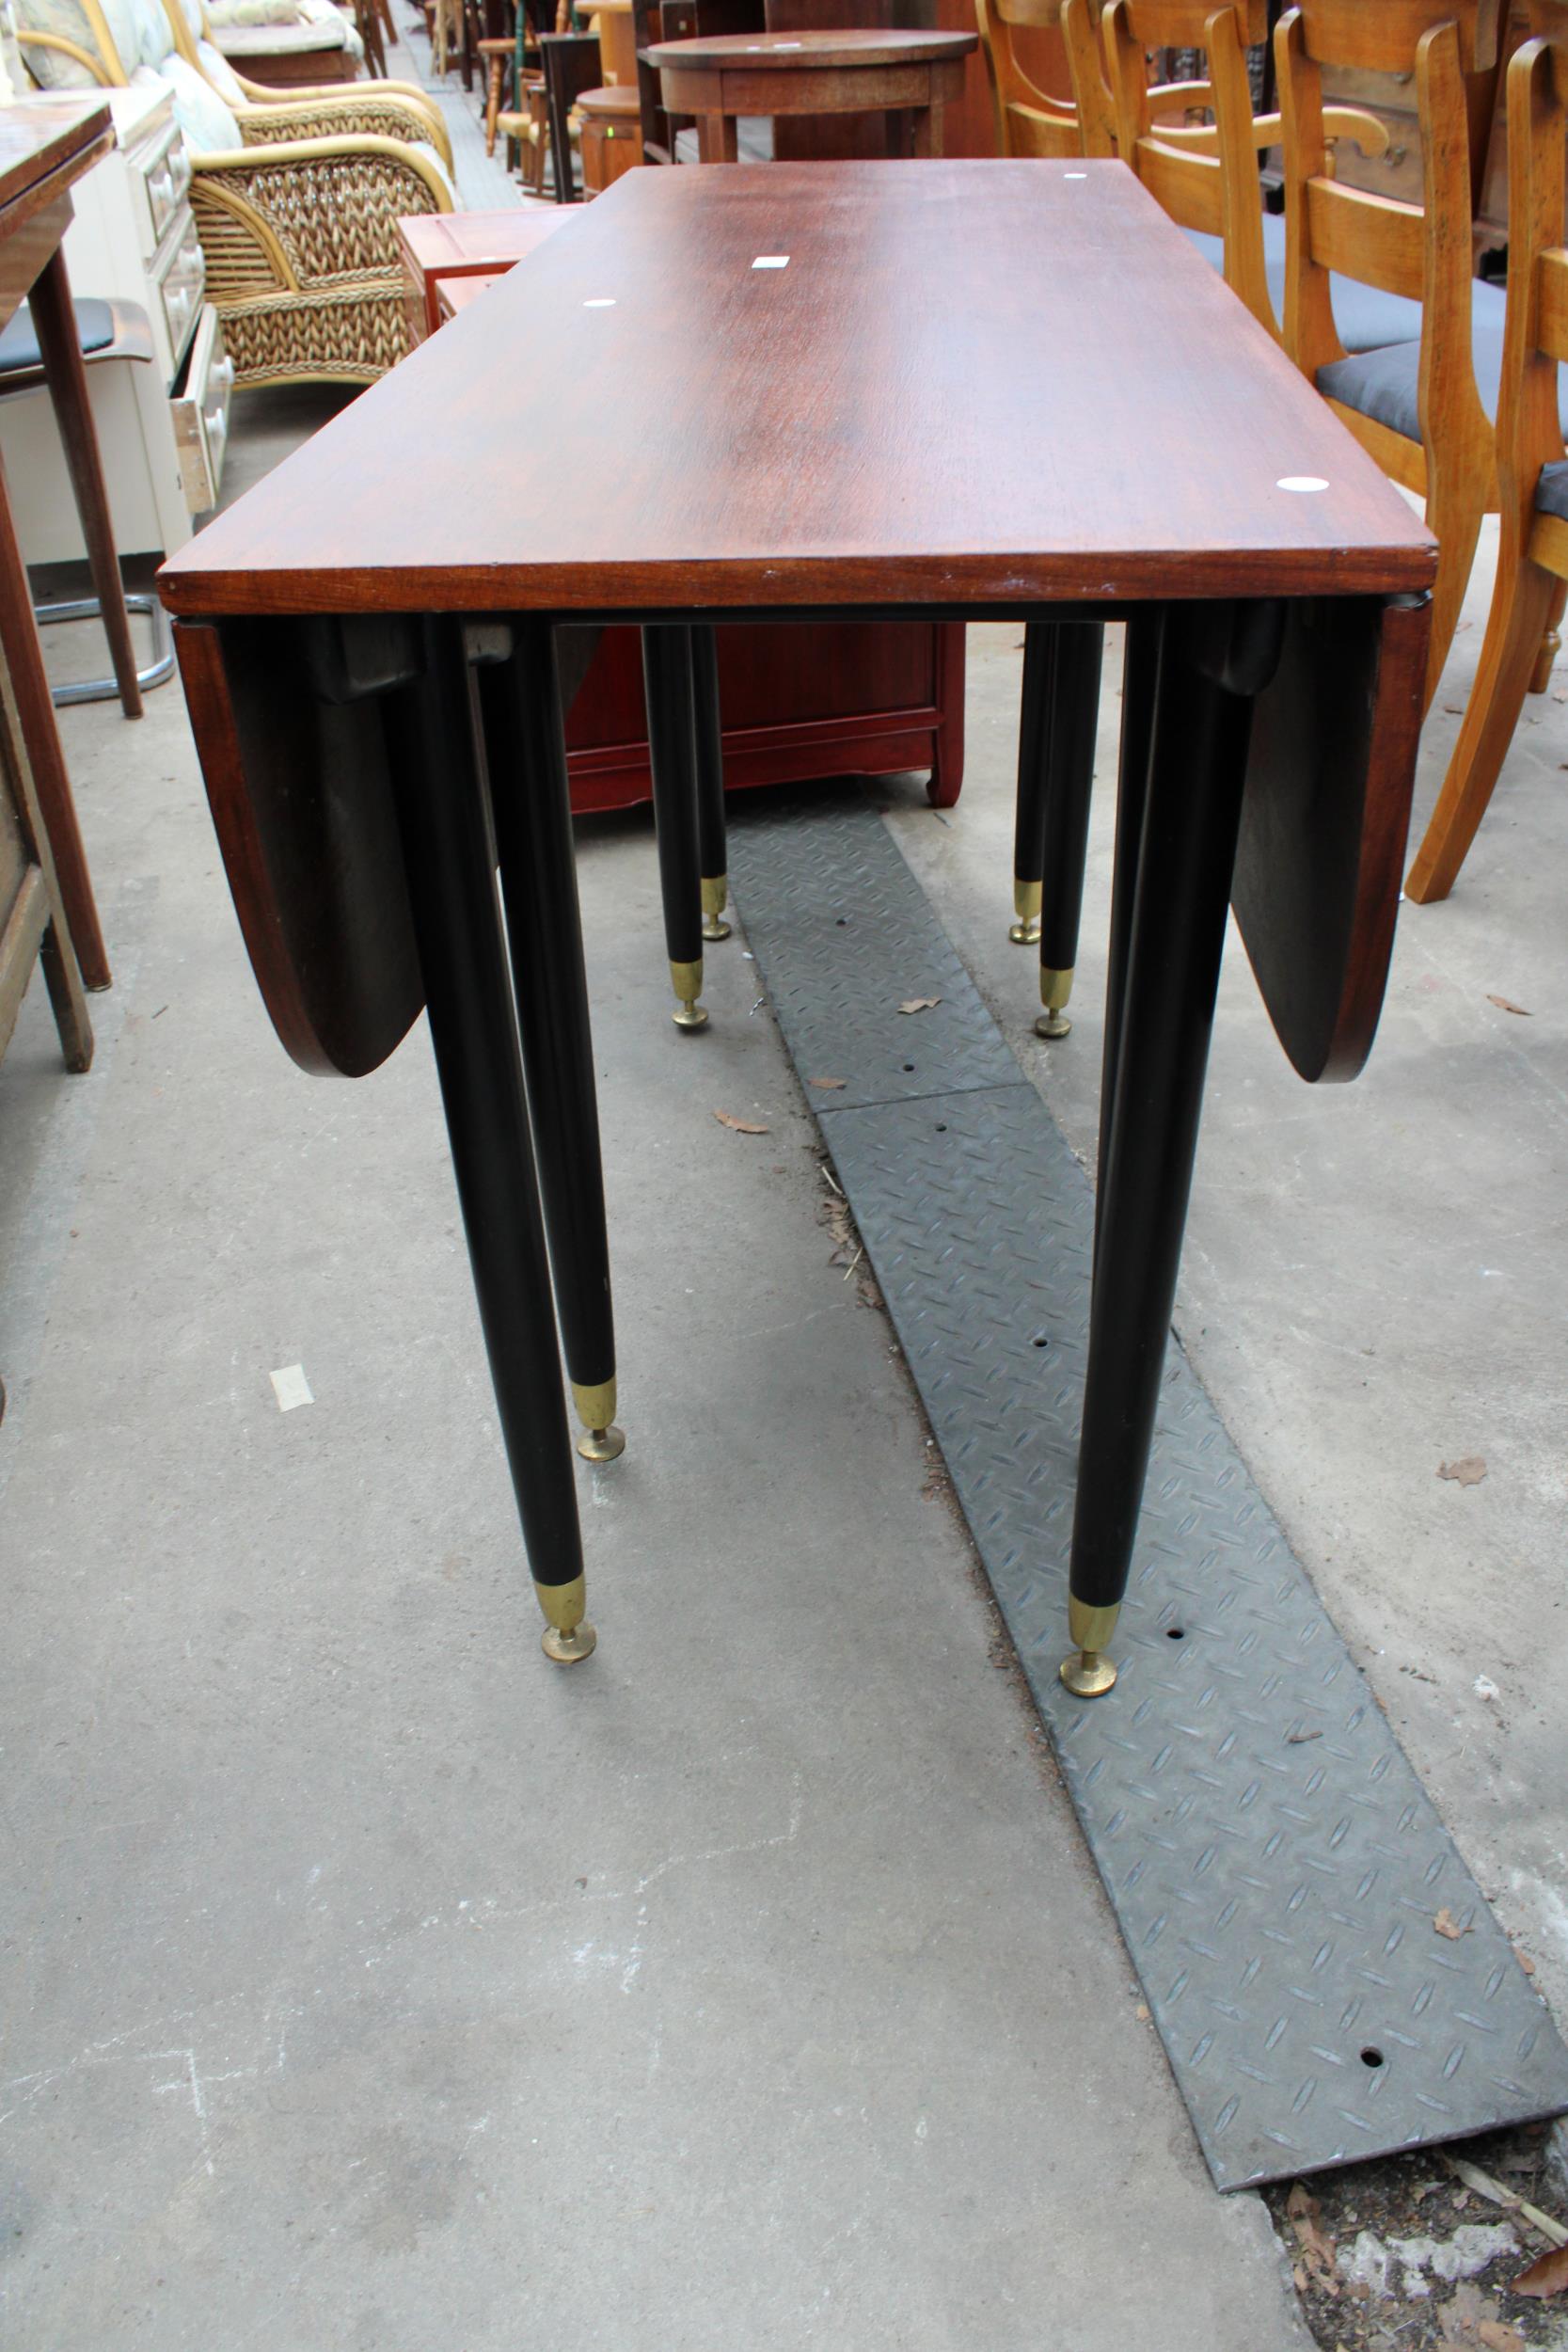 A RETRO TOLA WOOD POSSIBLY G PLAN E GOMME LIBRENZA (NO LABEL) DROP LEAF DINING TABLE - Image 2 of 3